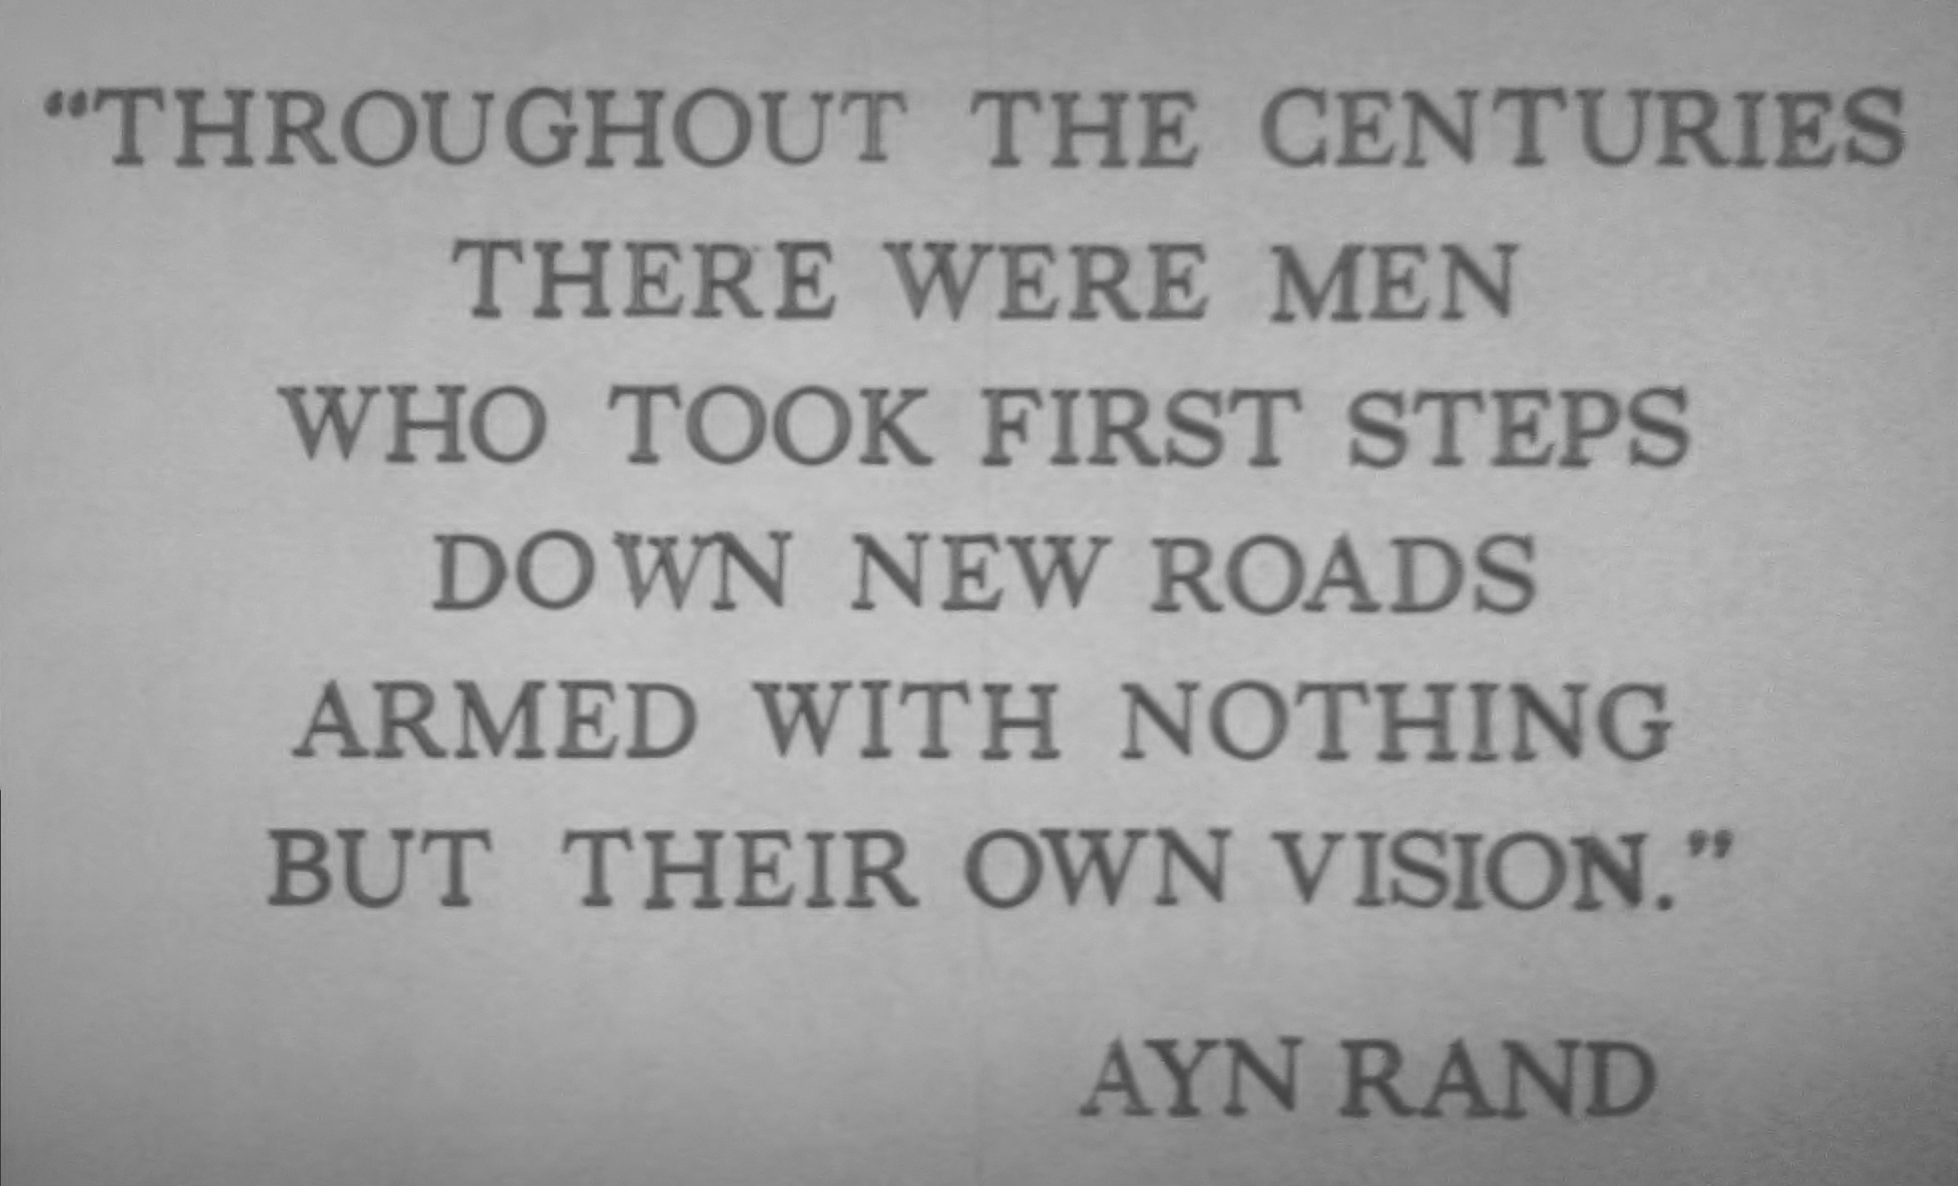 Ayn Rand quote #1